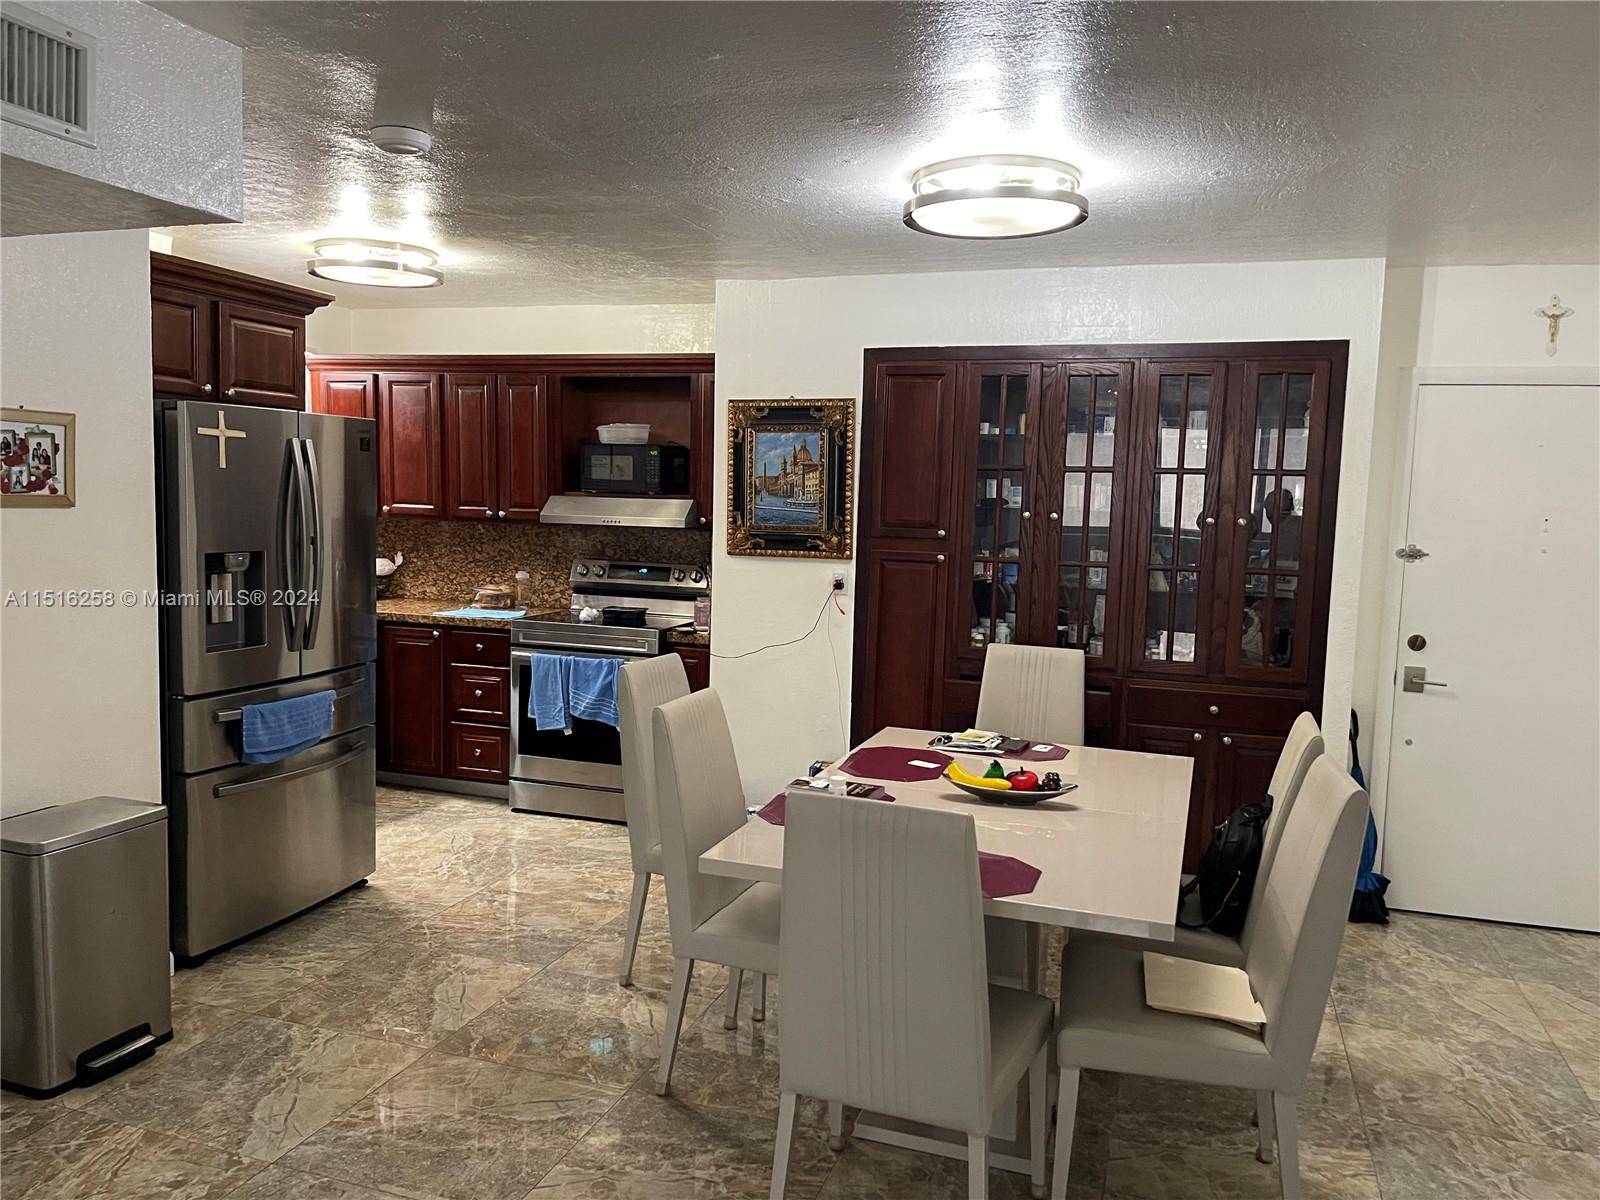 EXCELLENT 3 2 CORNER UNIT WITH MANY UPGRADES, OPEN FLOOR CONCEPT KITCHEN AREA WITH TOP OF THE LINE APPLIANCES, BUILT IN CHINA STORAGE CABINET, TILE THROUGHOUT THE ENTIRE HOME, ALL ...